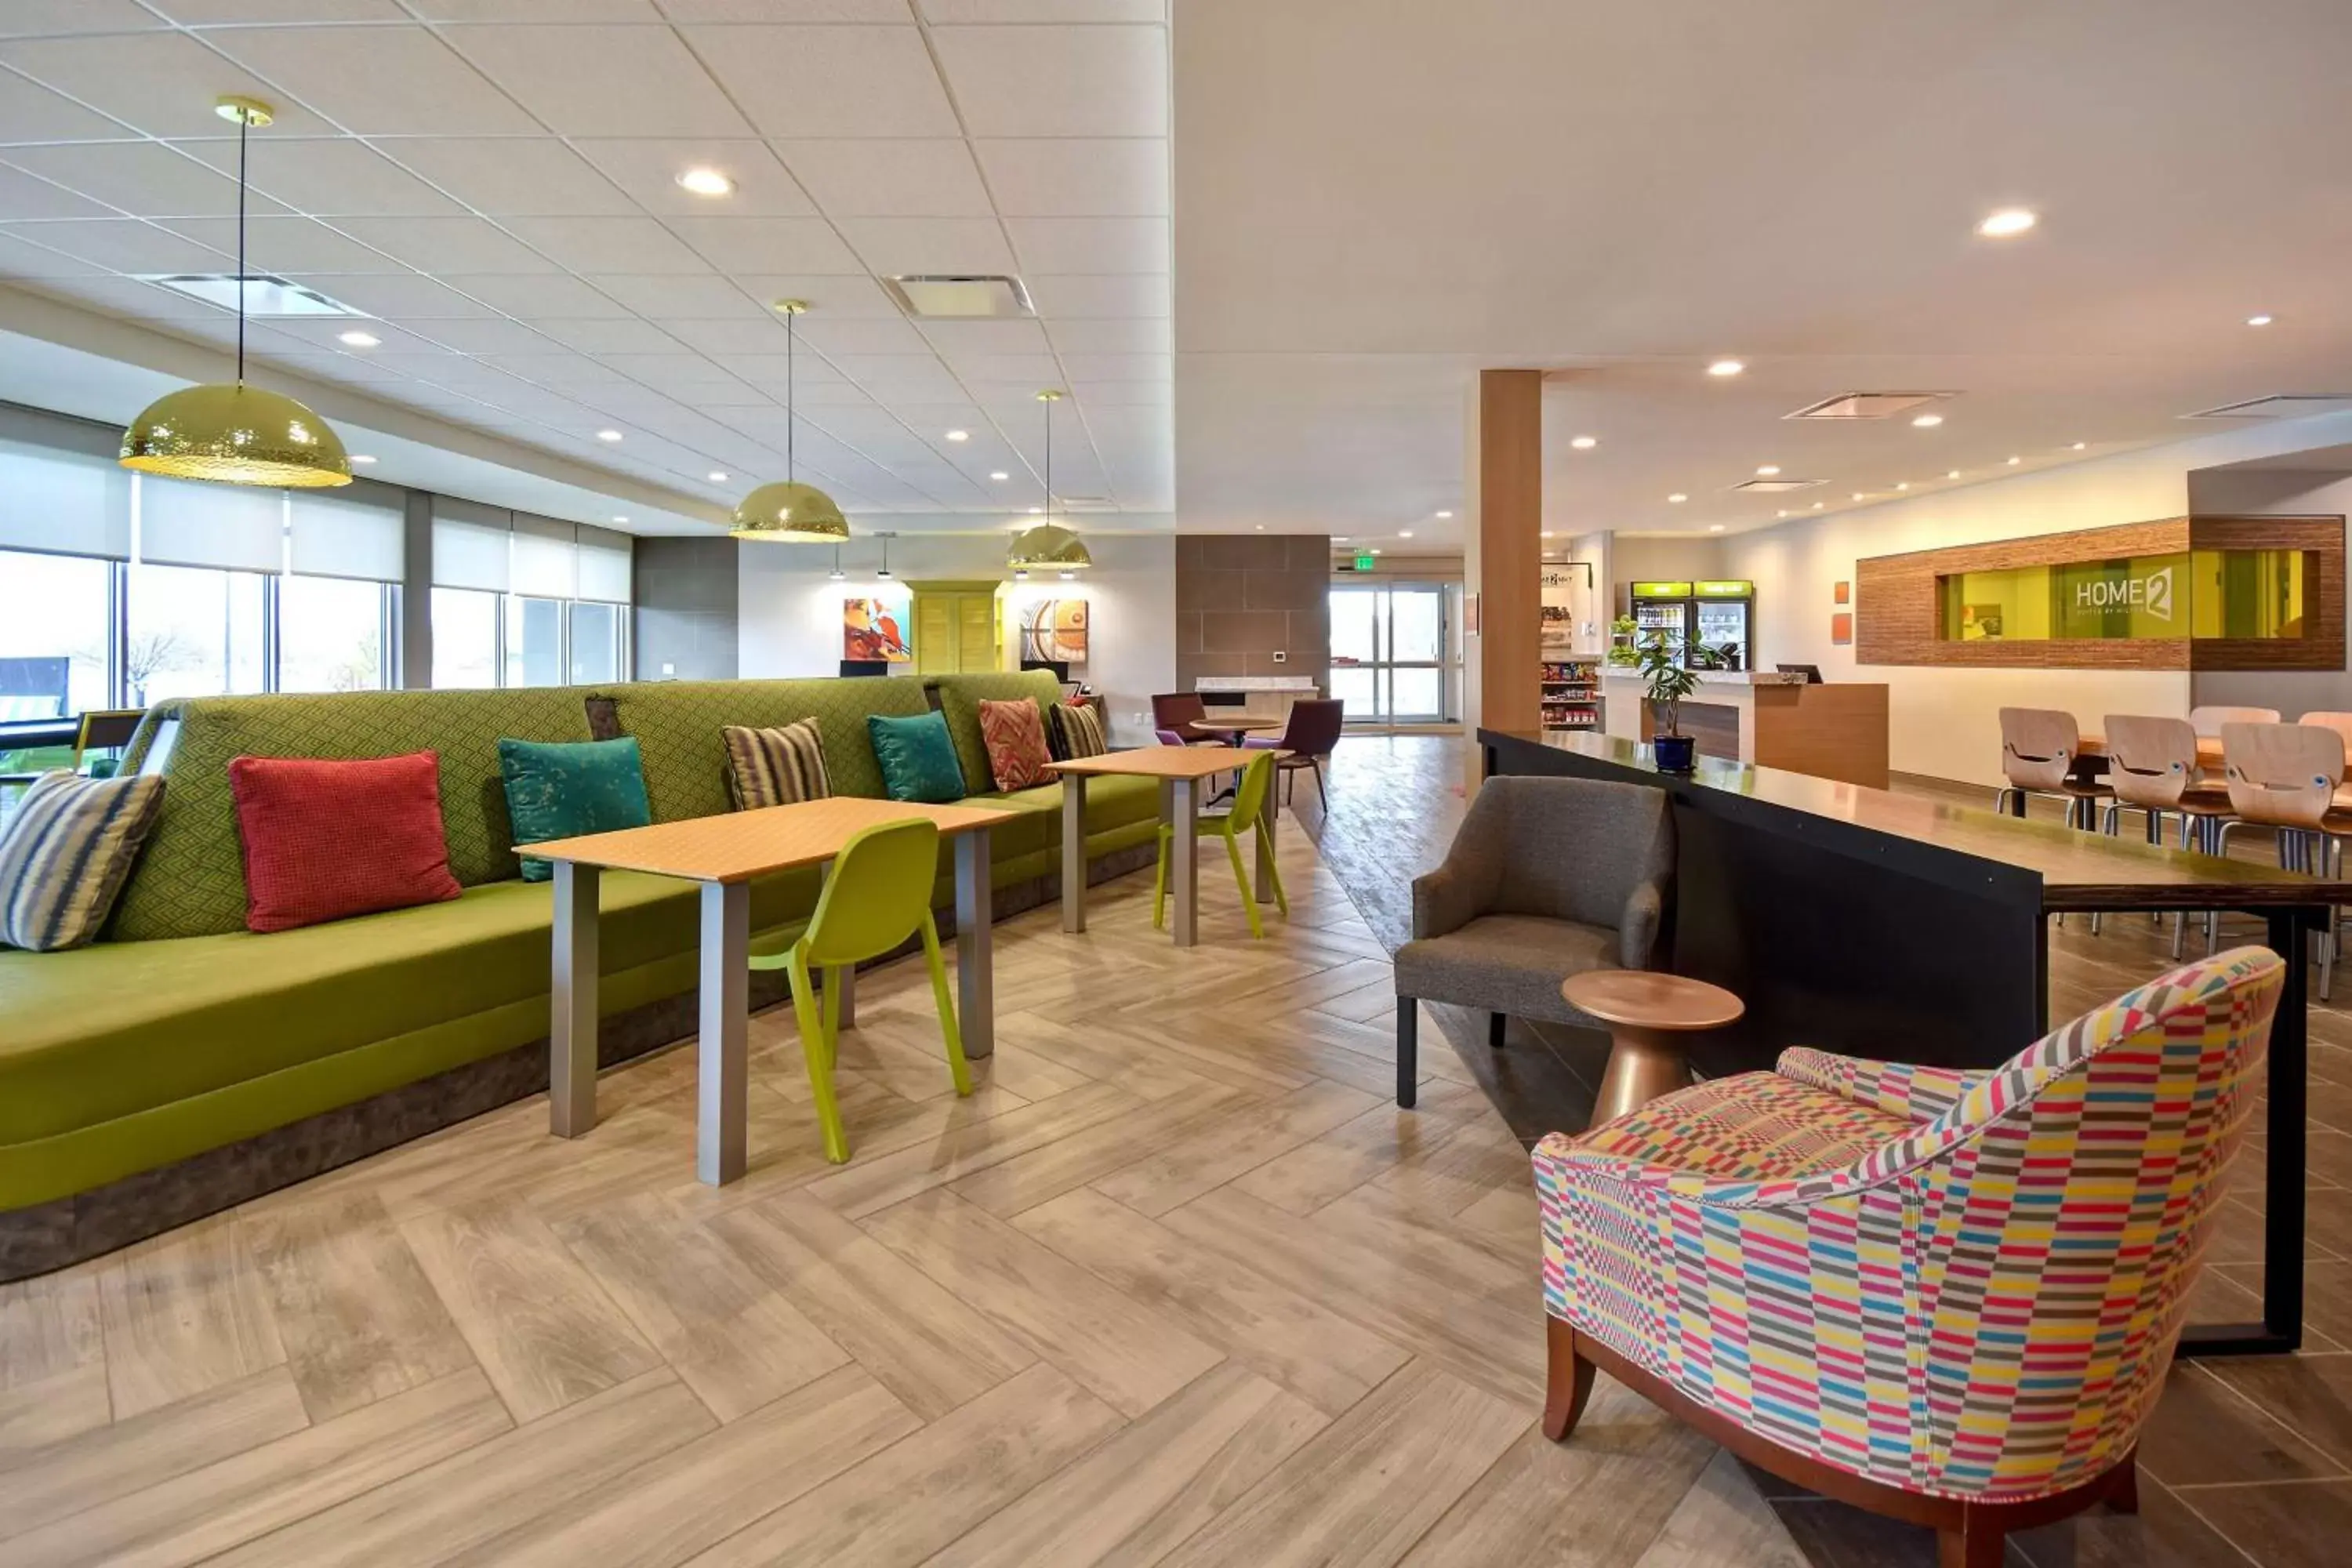 Lobby or reception in Home2 Suites Eau Claire South, Wi